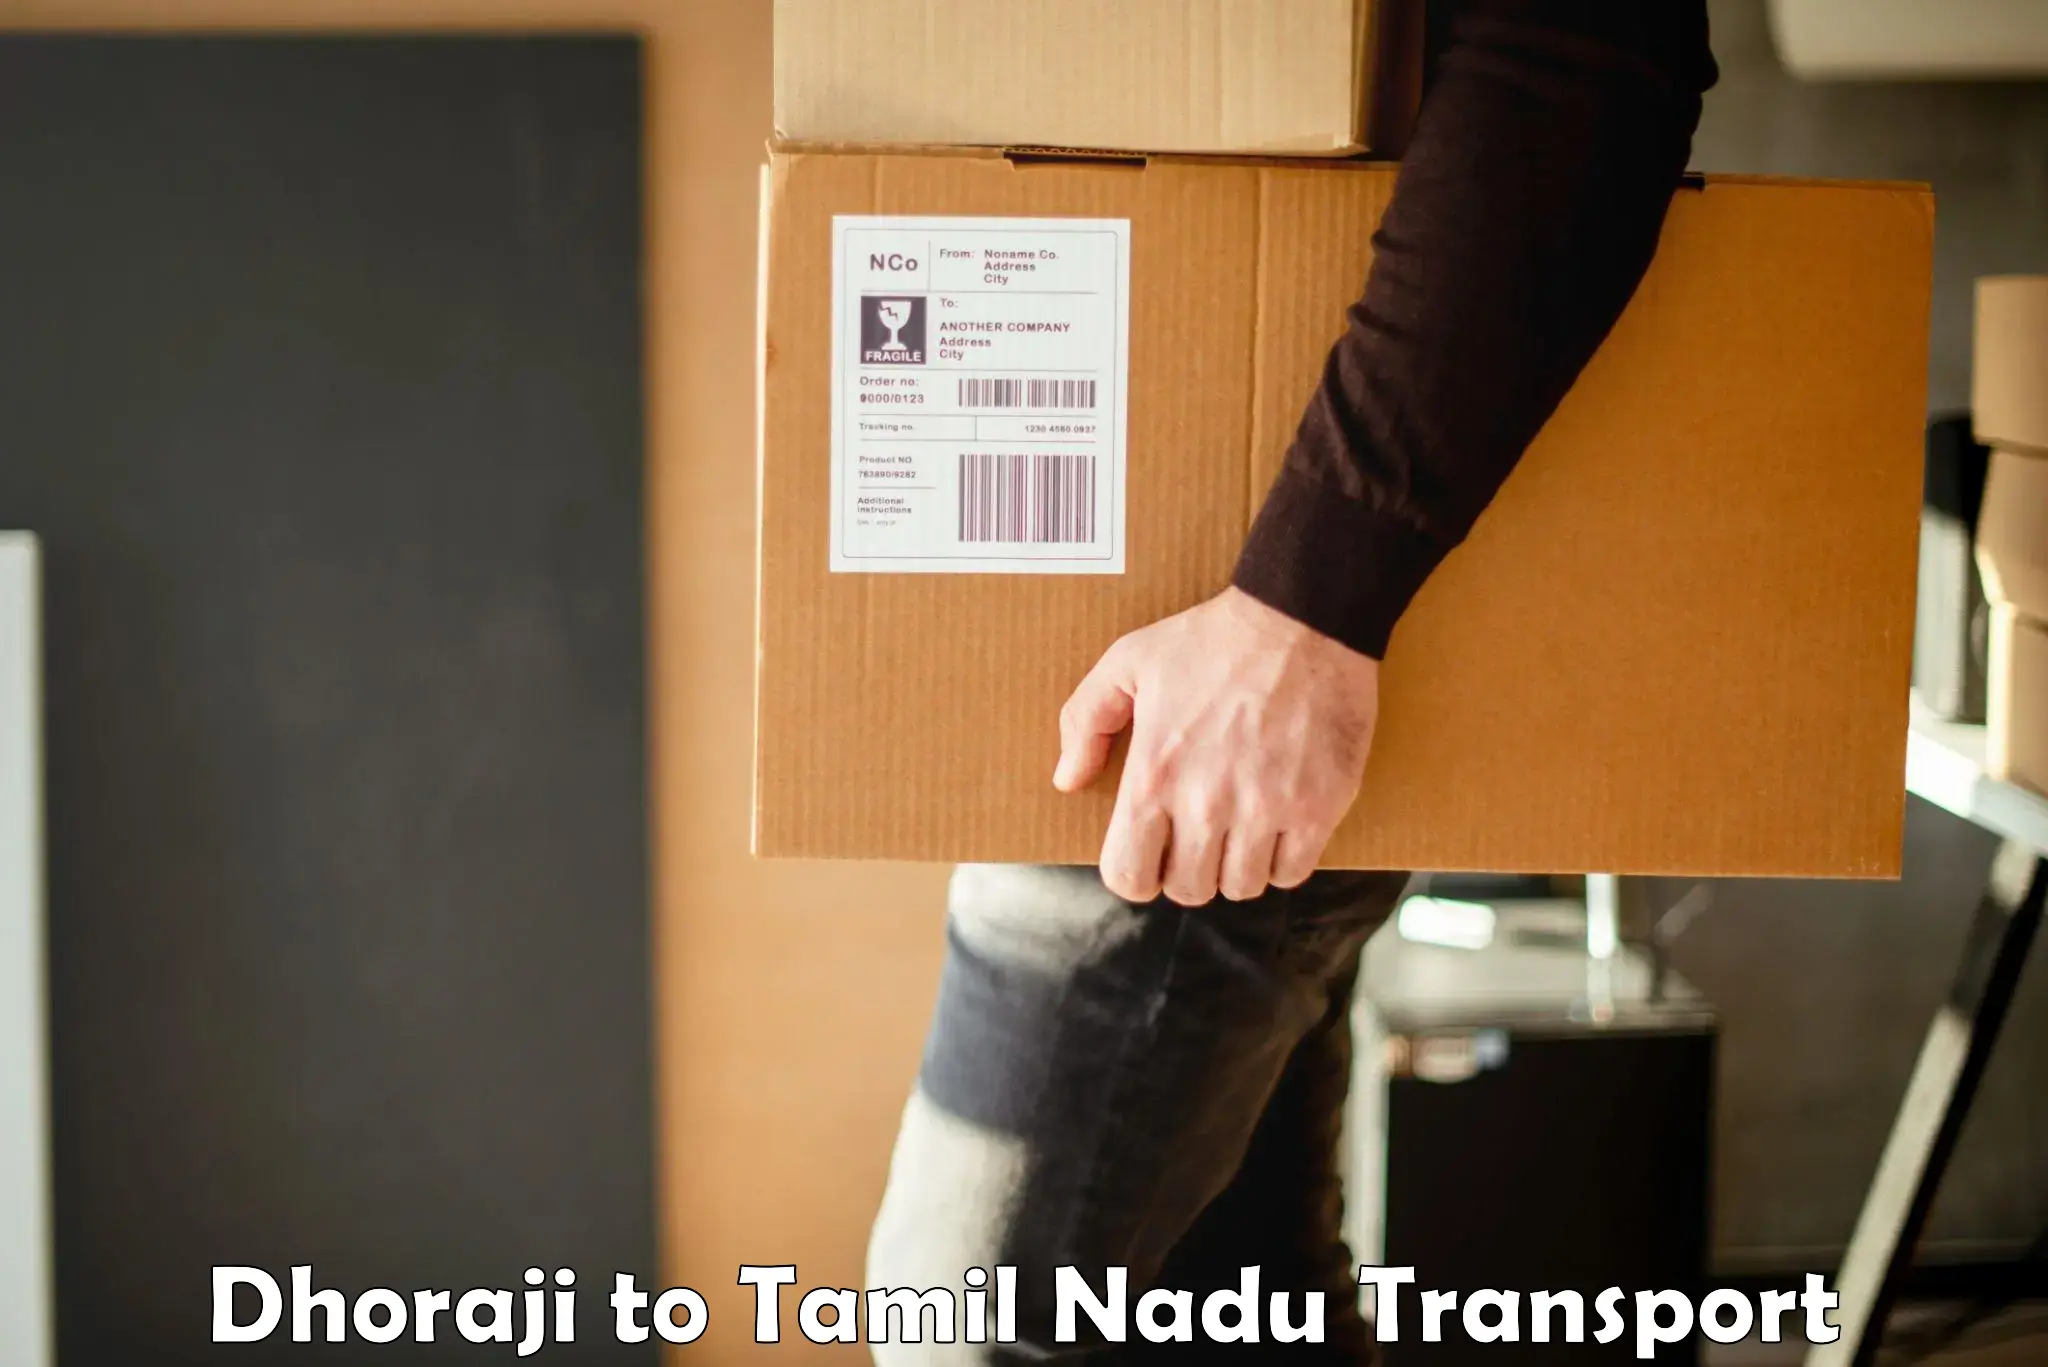 Goods delivery service Dhoraji to Chennai Port